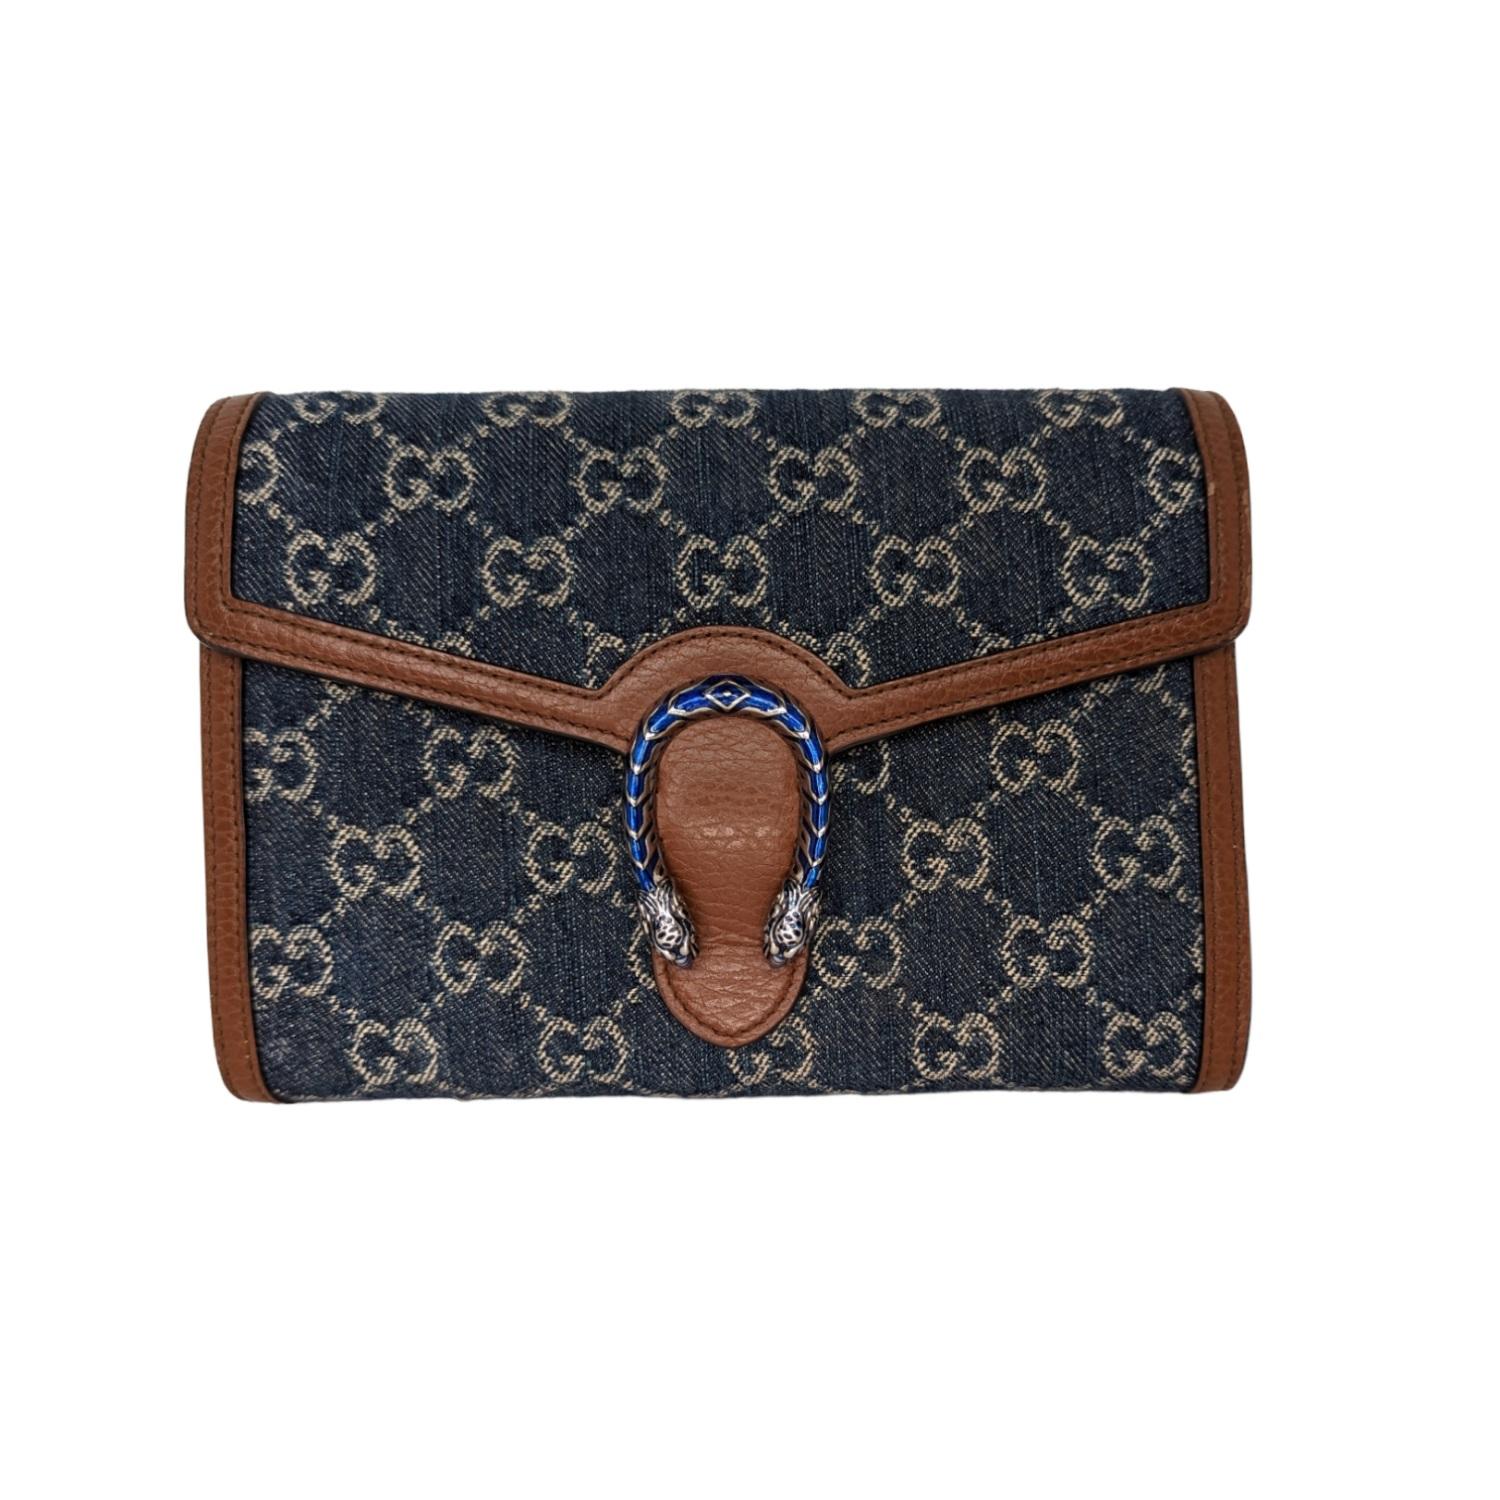 GUCCI Denim GG Monogram Mini Dionysus Chain Wallet in Blue and Ivory. This stylish bag is crafted of Gucci monogram in blue denim. This bag features an optional silver chain shoulder strap and a textured horseshoe closure with lion heads with blue